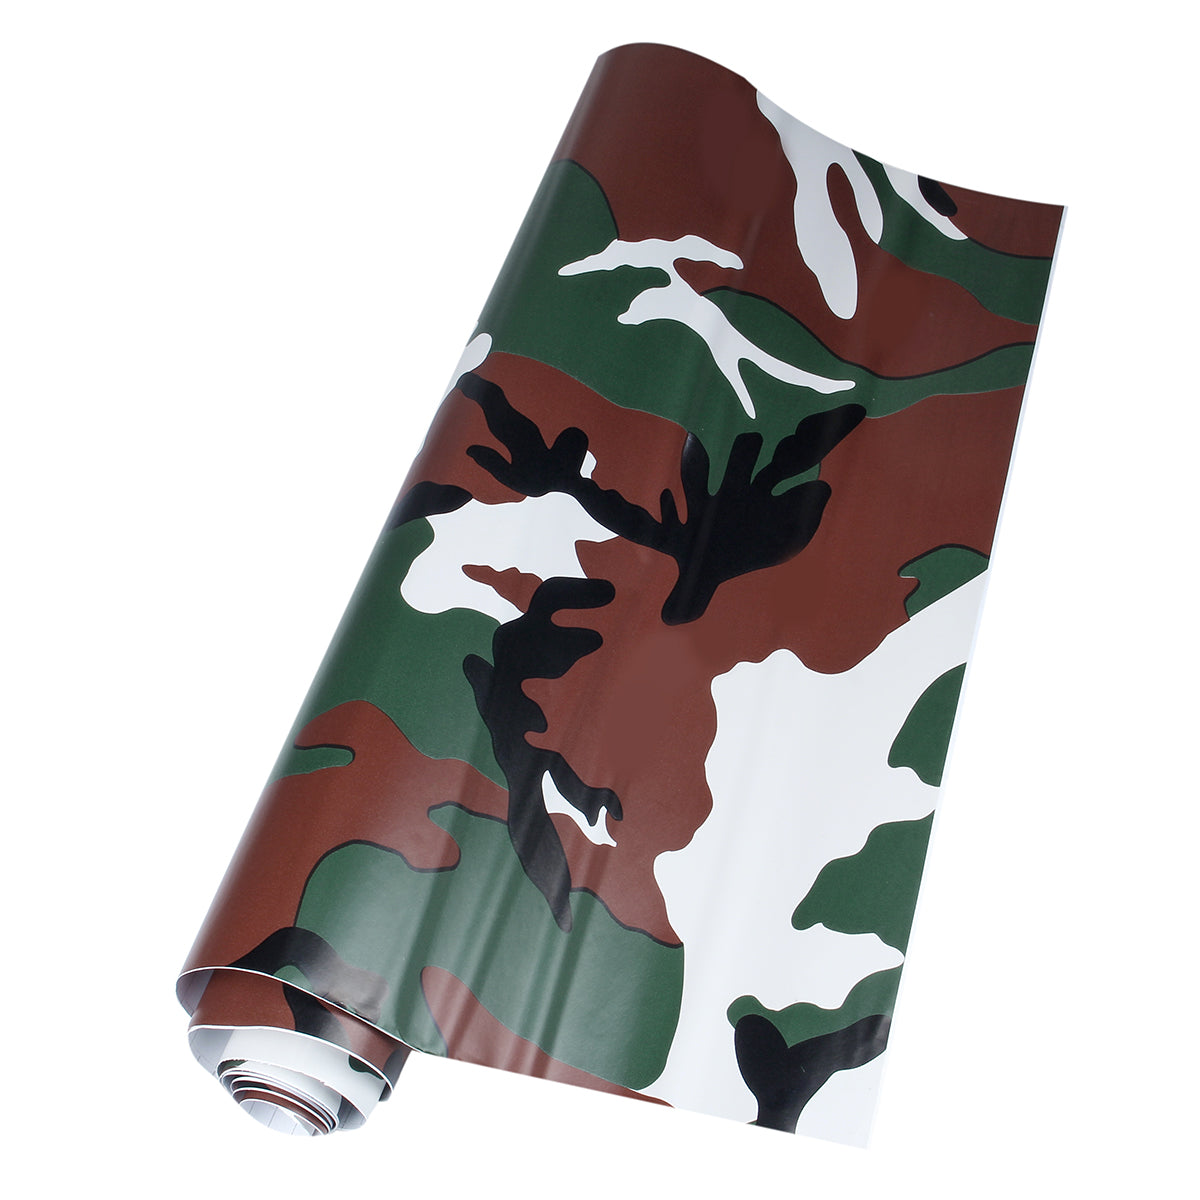 Saddle Brown Stickers DIY Styling Accessories Woodland Green Camouflage Desert For Motorcycle Automobiles Car